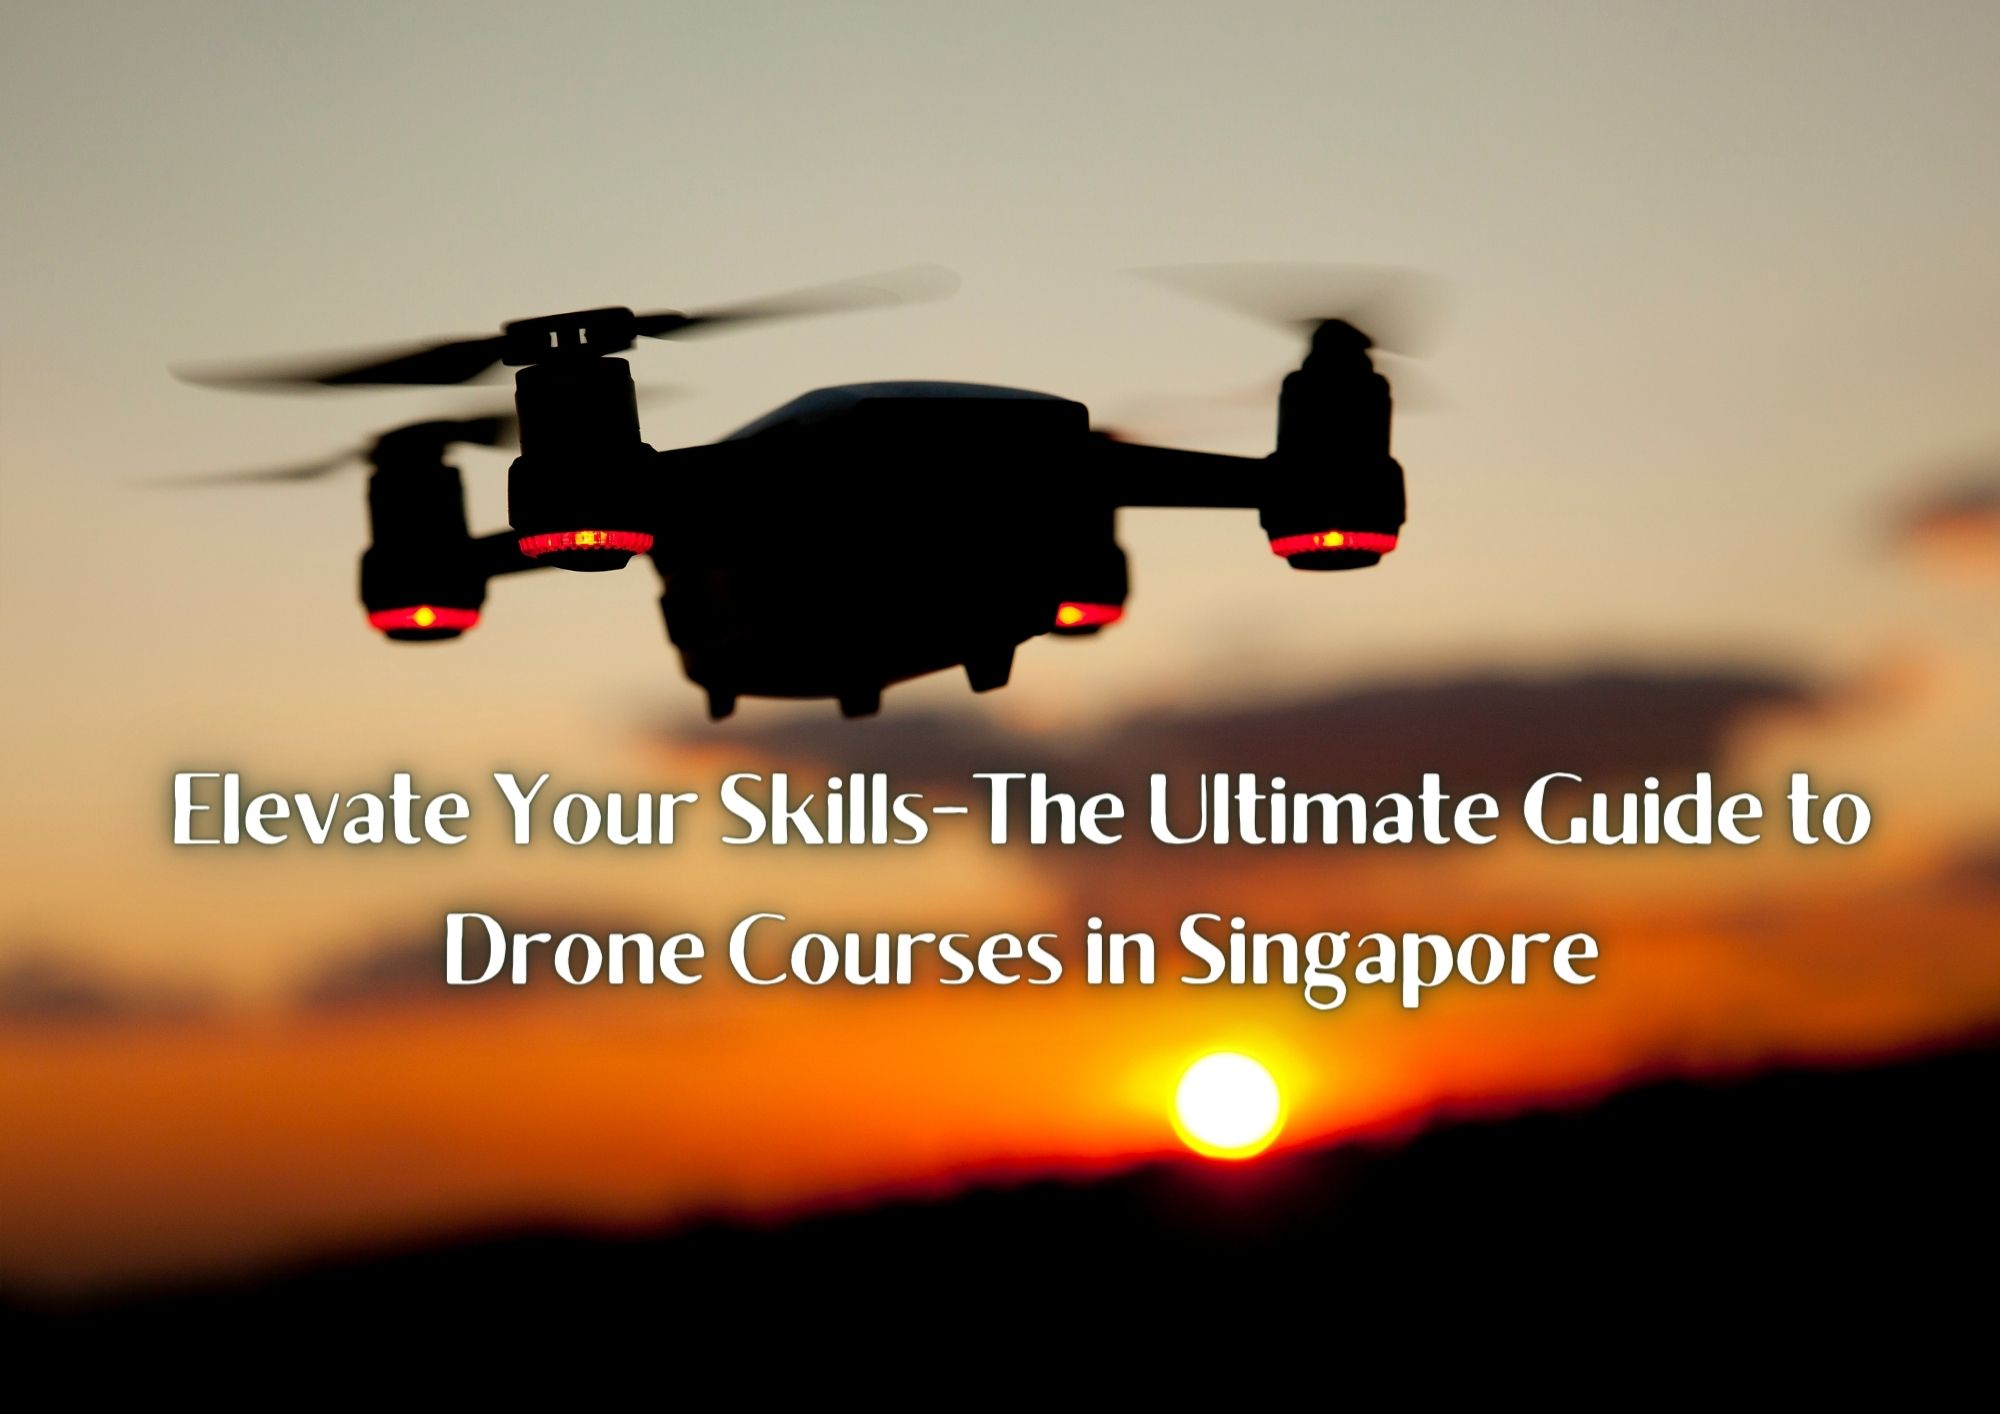 Elevate Your Skills-The Ultimate Guide to Drone Courses in Singapore